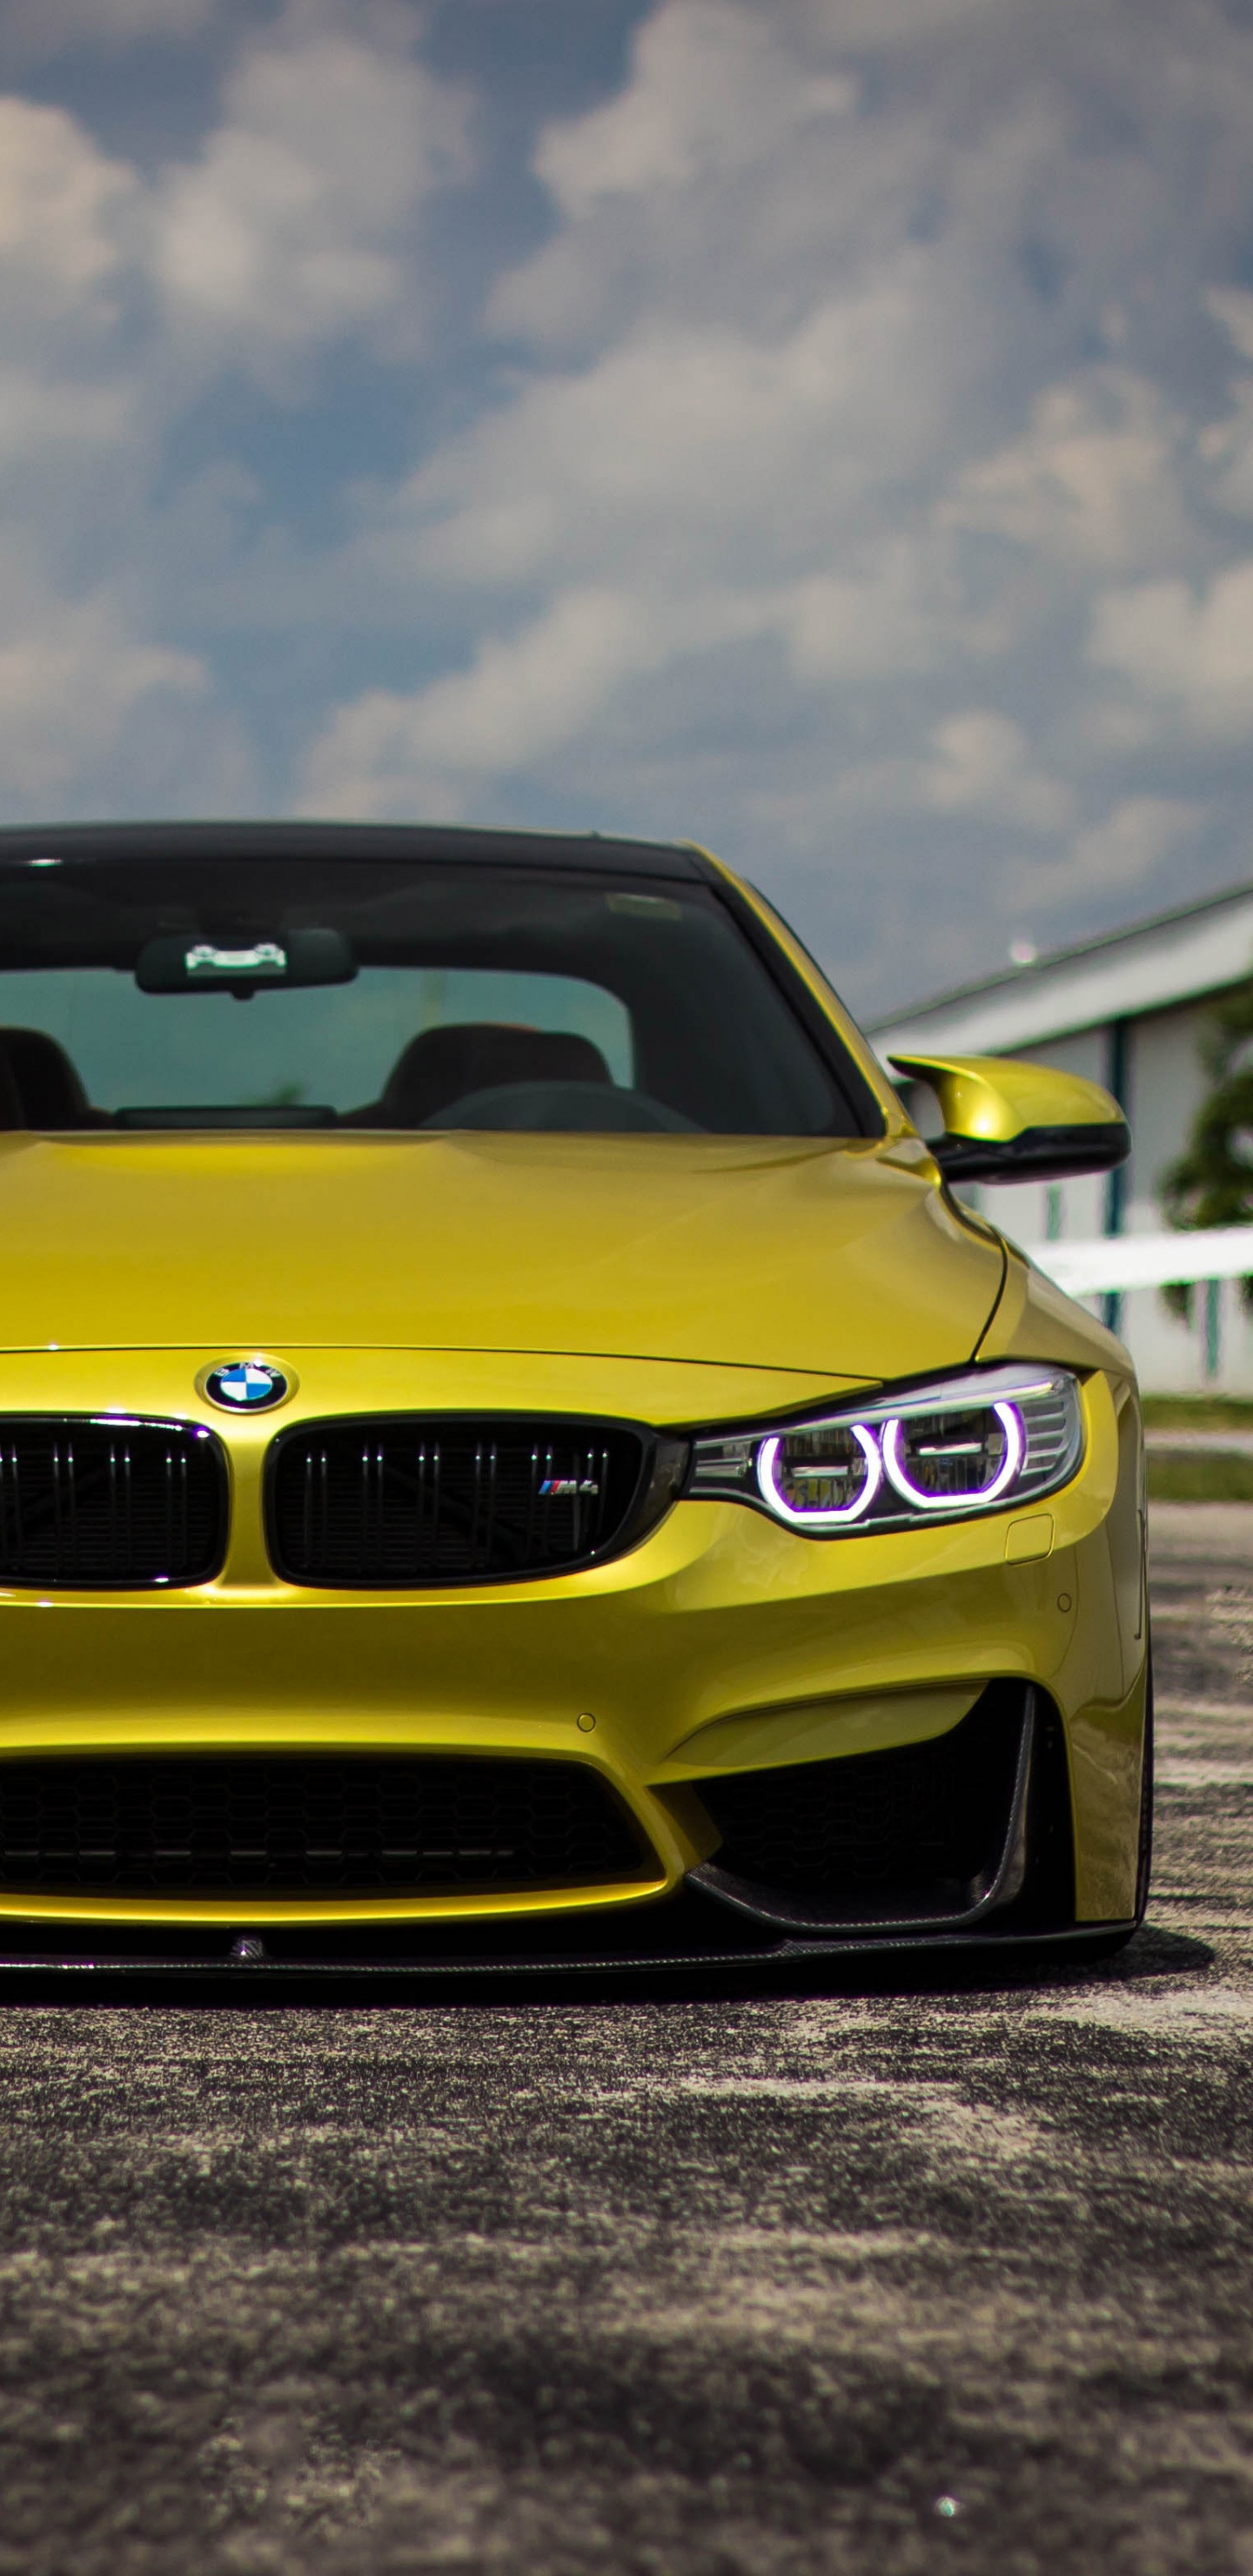 Yellow Bmw m 3 on Road During Daytime. Wallpaper in 1440x2960 Resolution